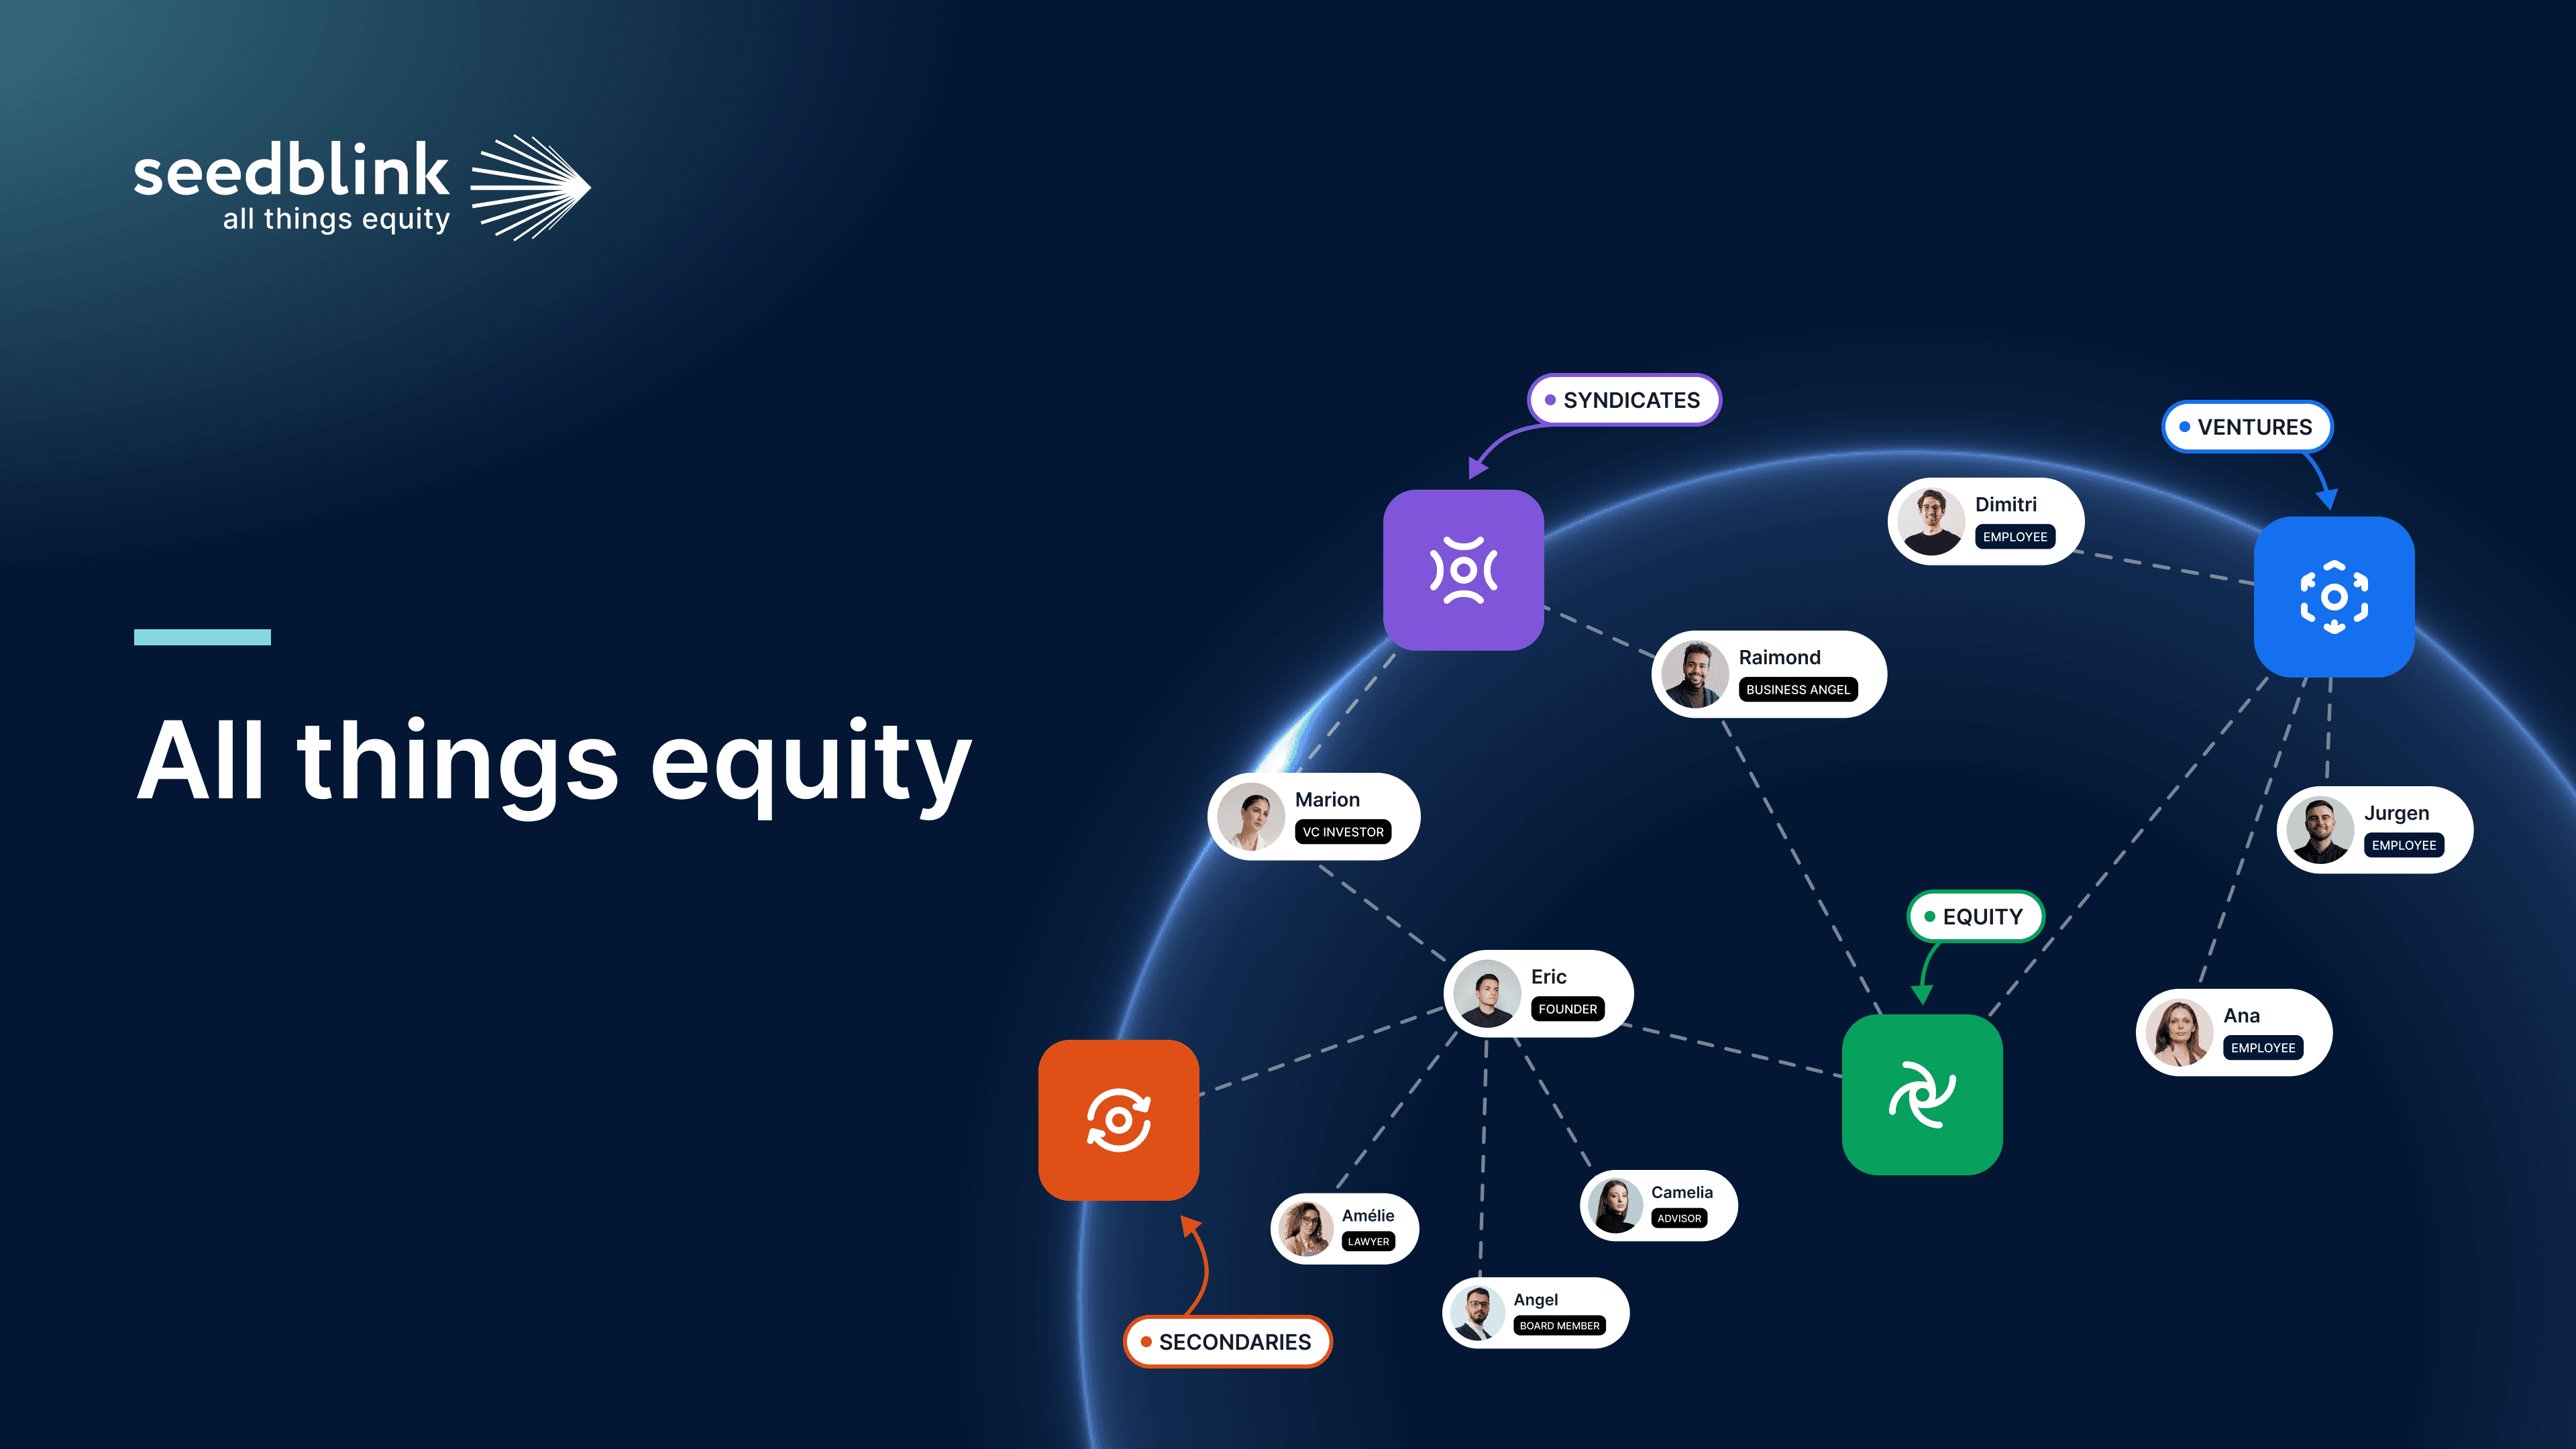 SeedBlink launches all-in-one equity management and investment platform